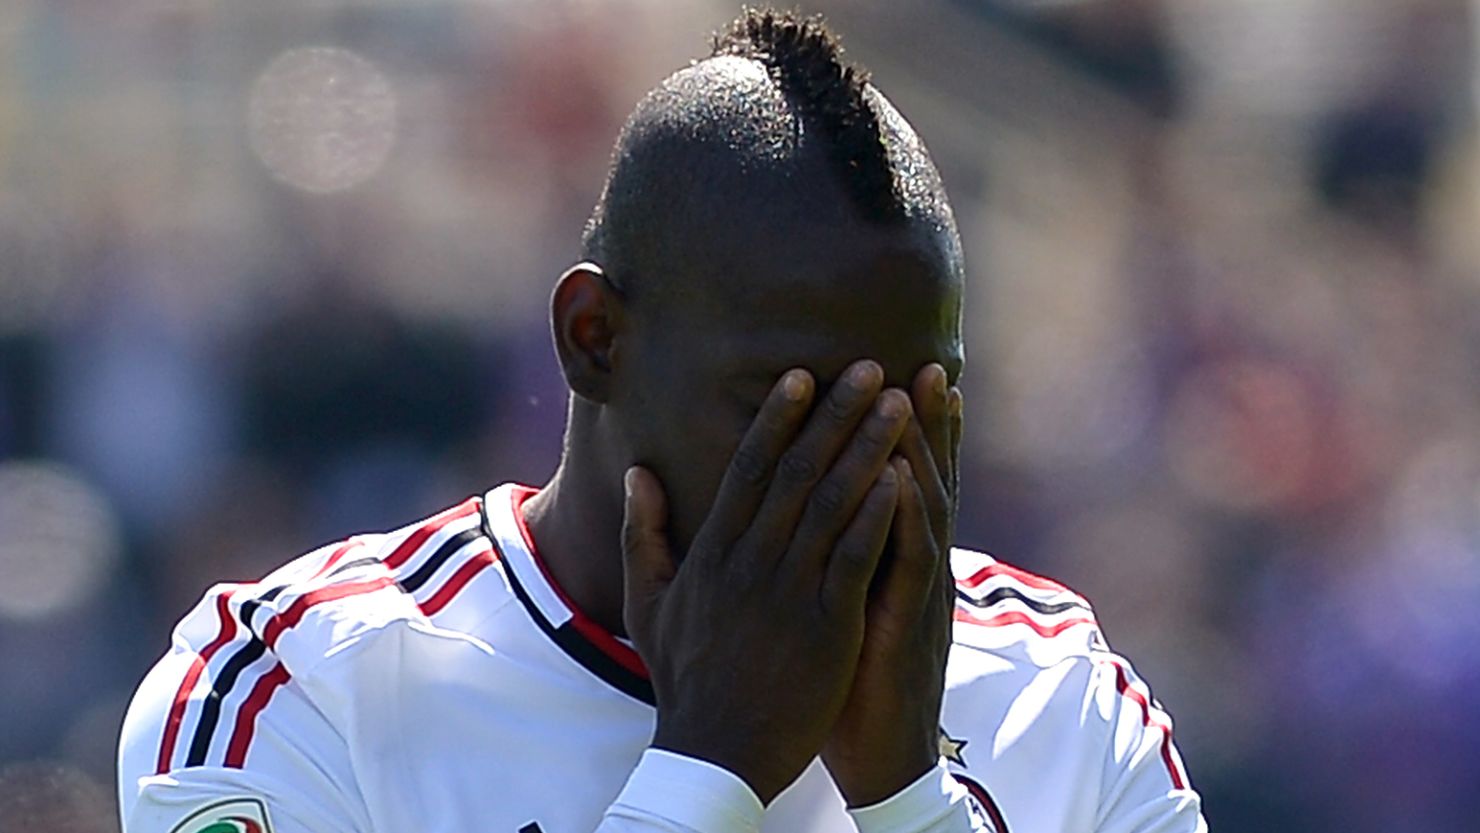 AC Milan striker Mario Balotelli was booked in Sunday's 2-2 draw with 10-man Fiorentina, incurring a suspension. 